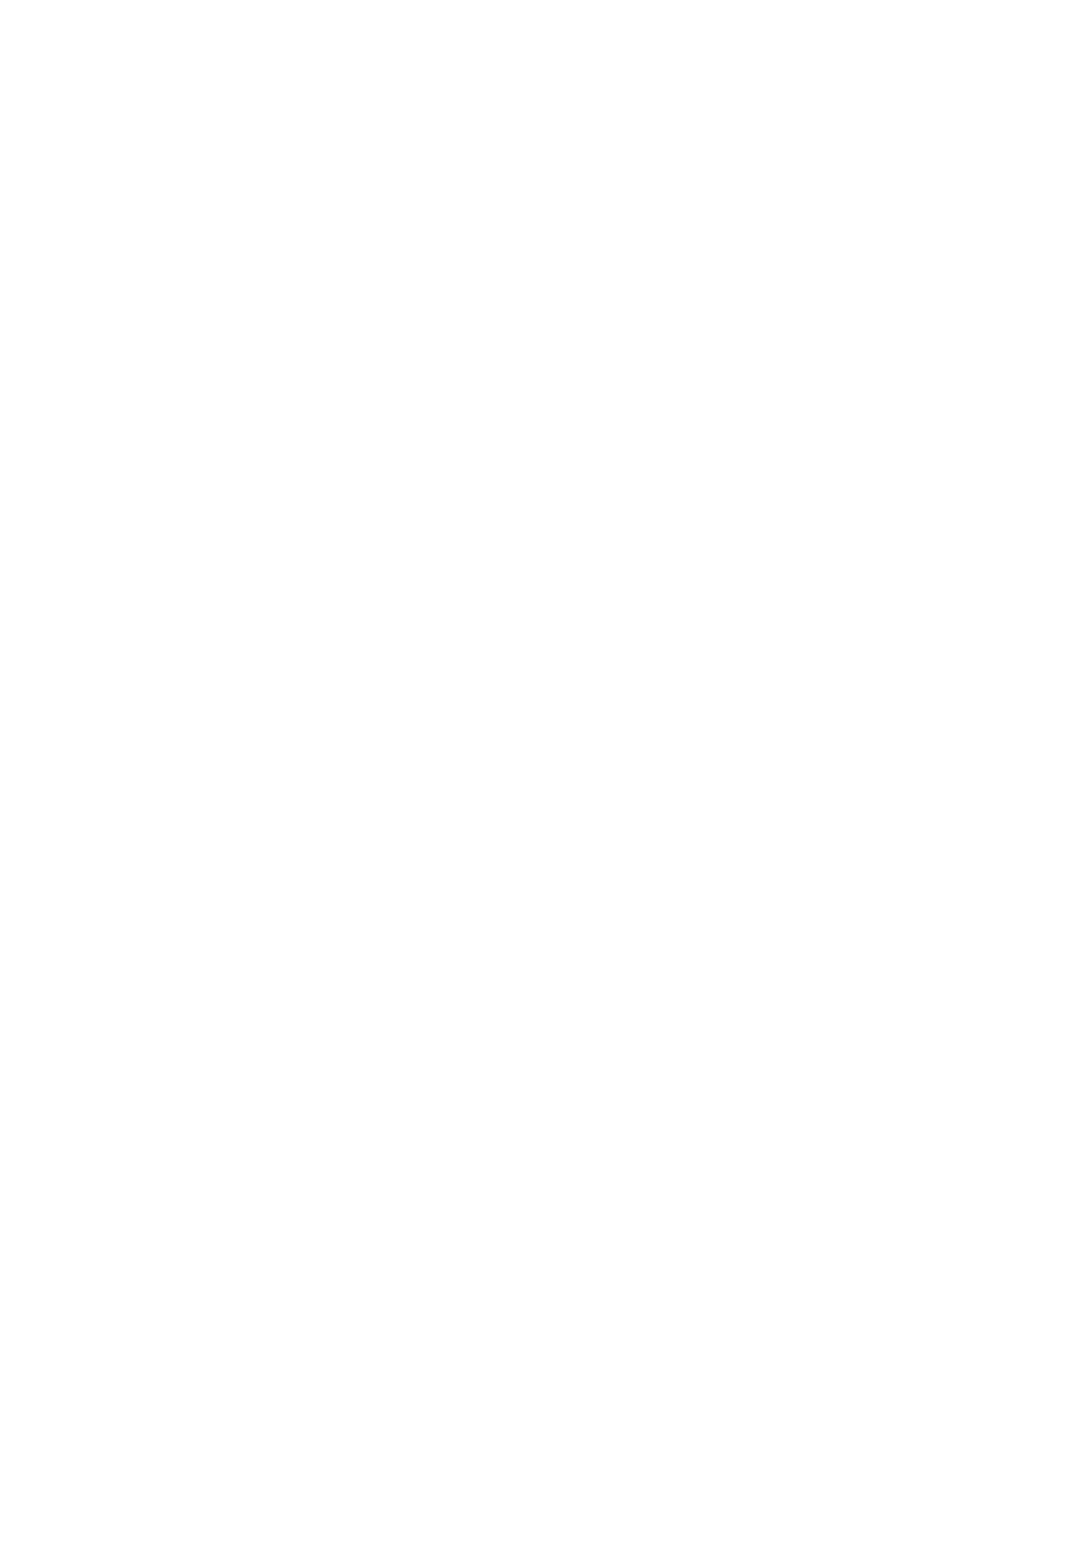 stethoscope in a cancel circle